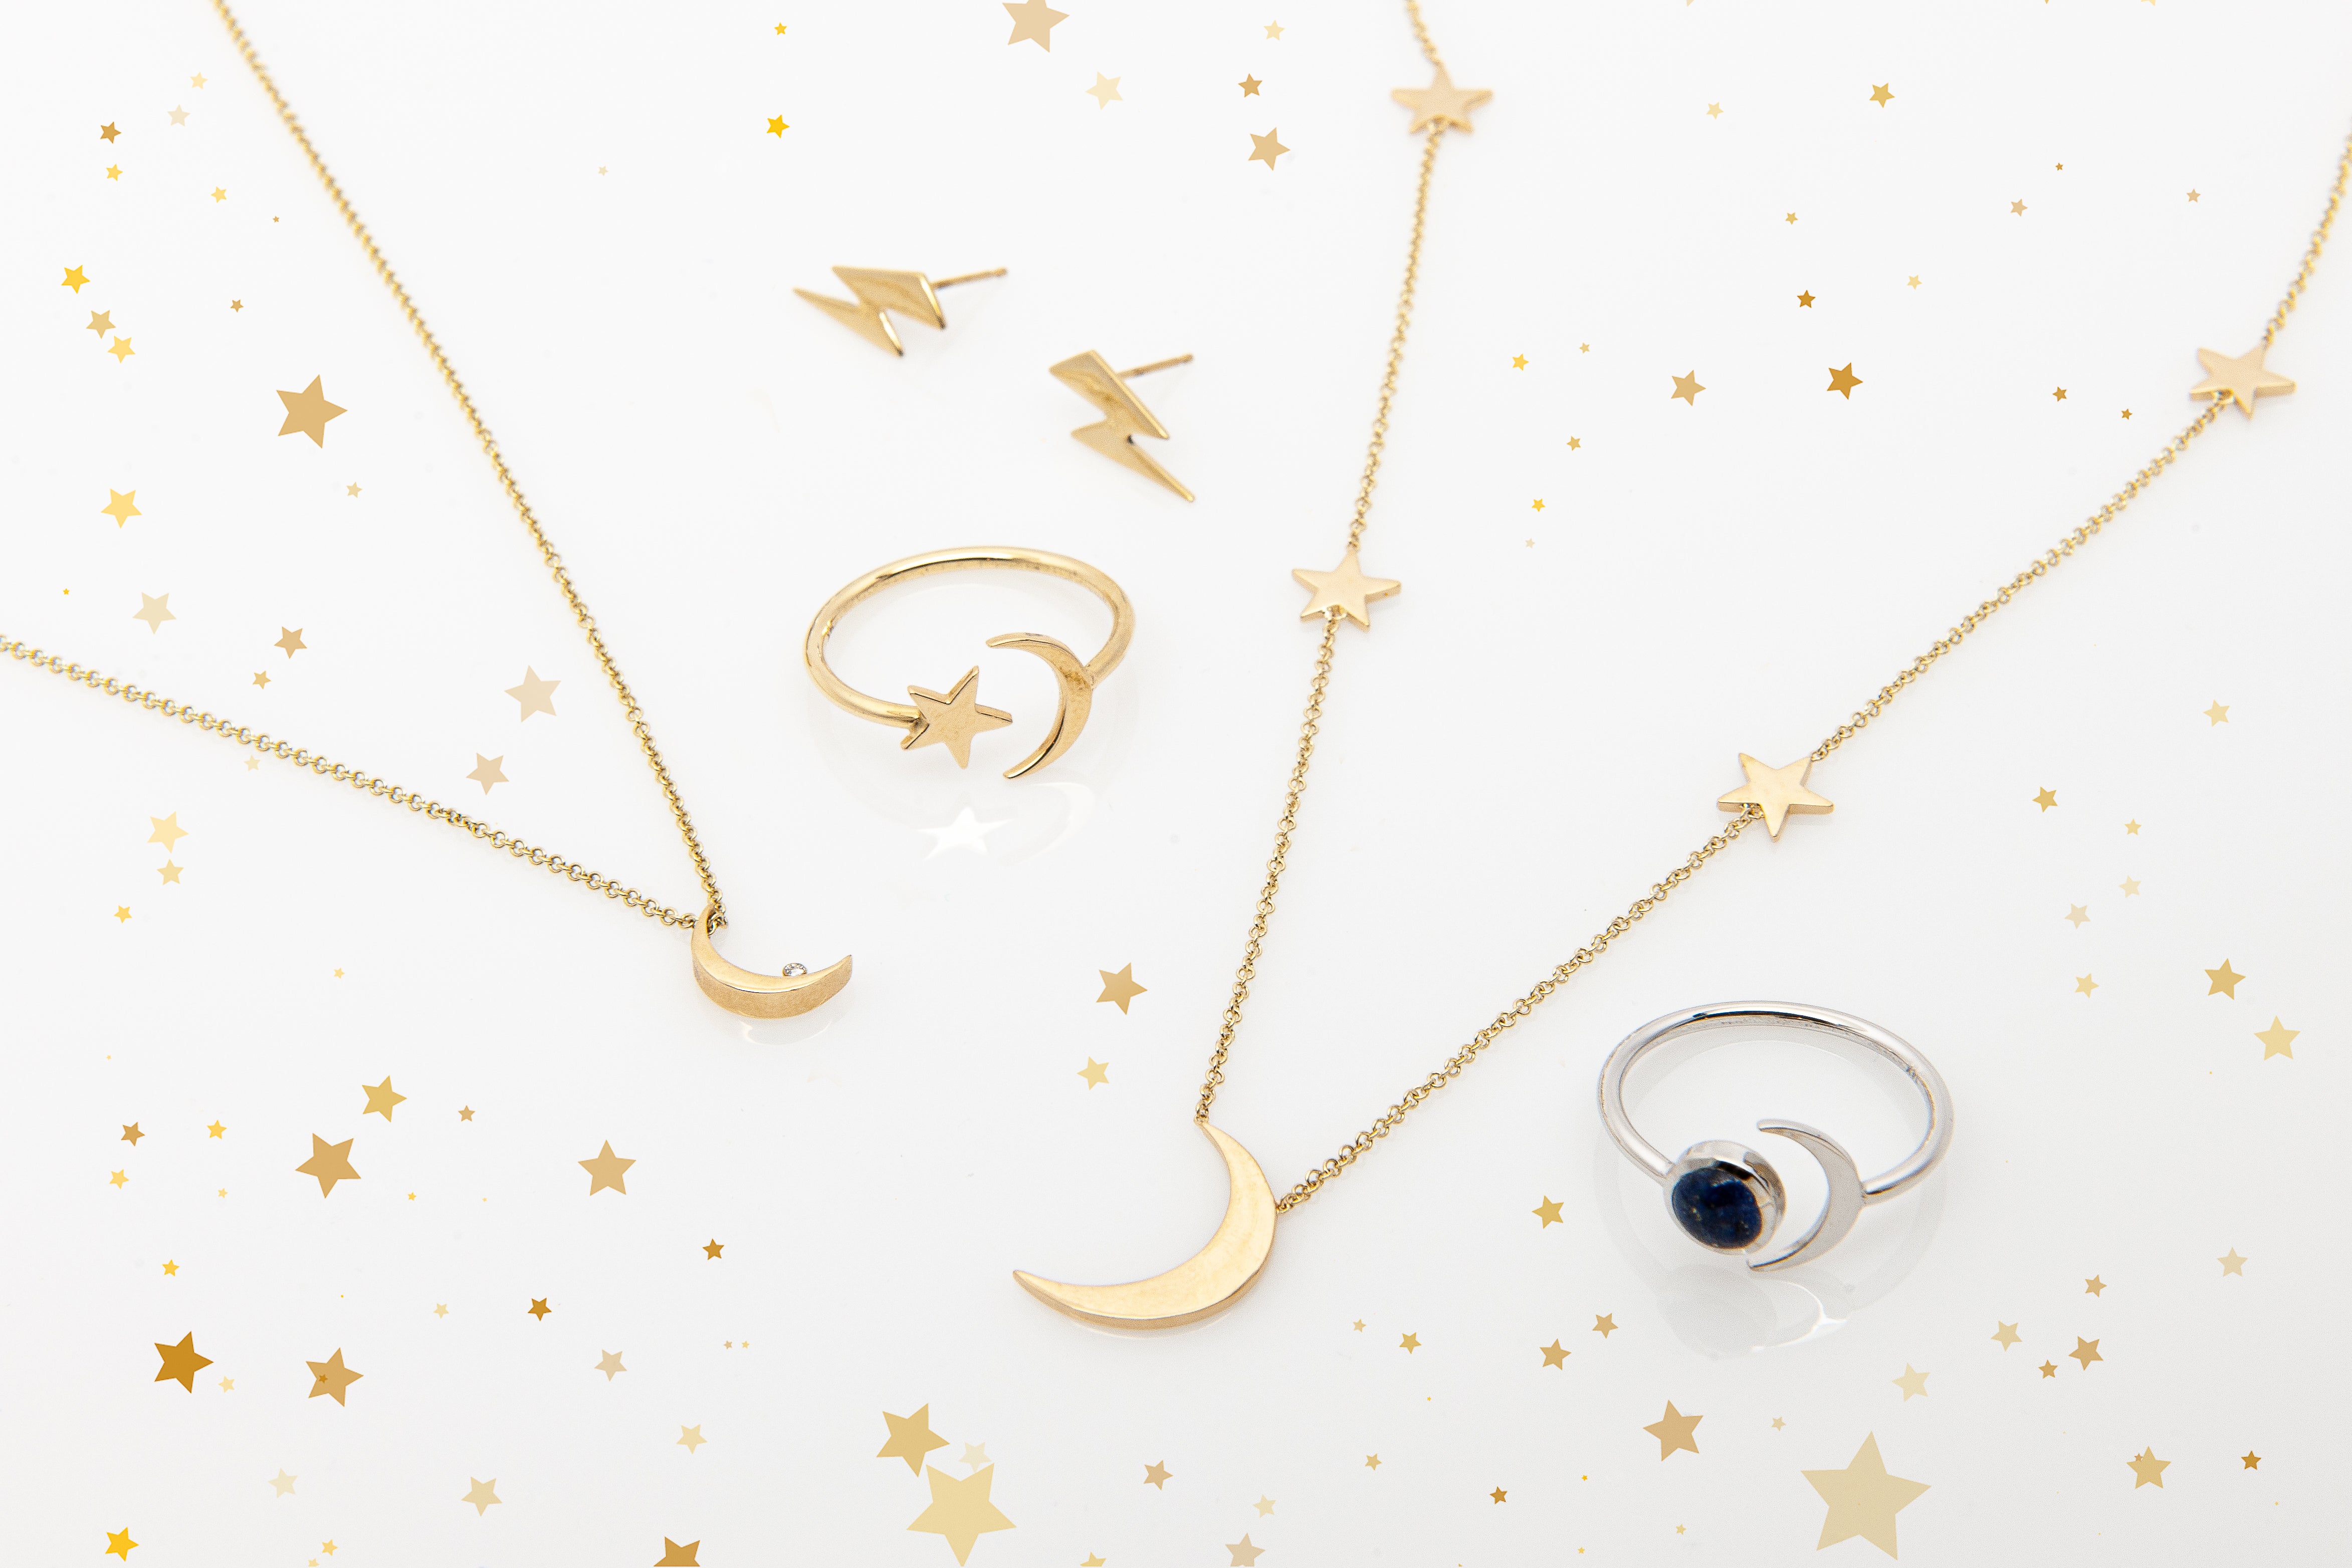 A preview of Starflower Jewelry’s celestial collection, including 14k Yellow Gold Shoot for the Moon Station Necklace.